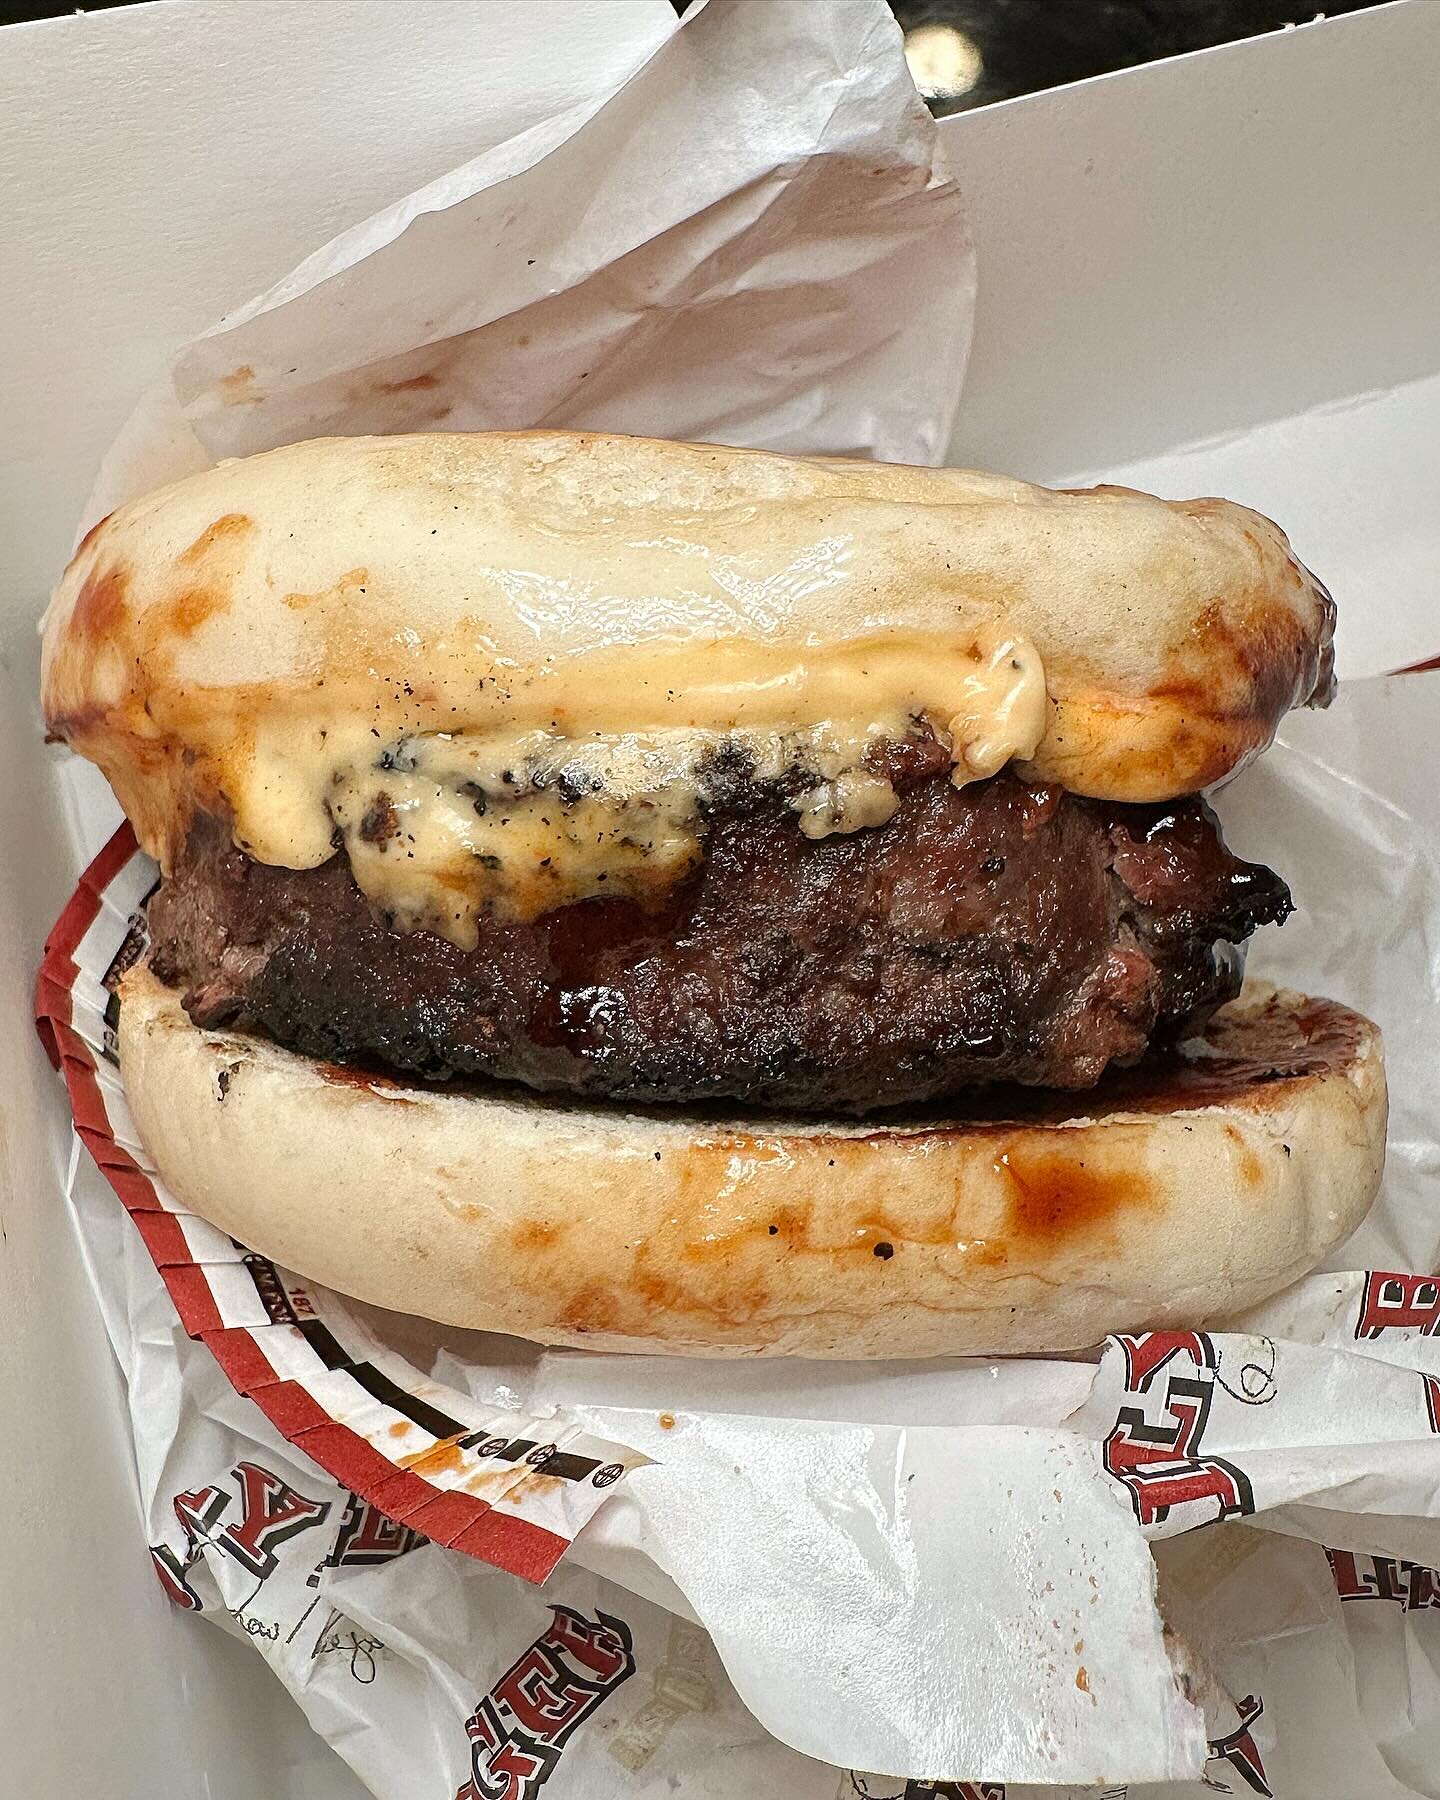 The Cheeseburger from Daily Burger by Drew Neiporent at MSG. 

Yes, this is a heat lamp burger but don&rsquo;t be deceived, it&rsquo;s a great one! The patty is super juicy between a buttery bun, and the bacon jam and cheese sauce deliver such a uniq